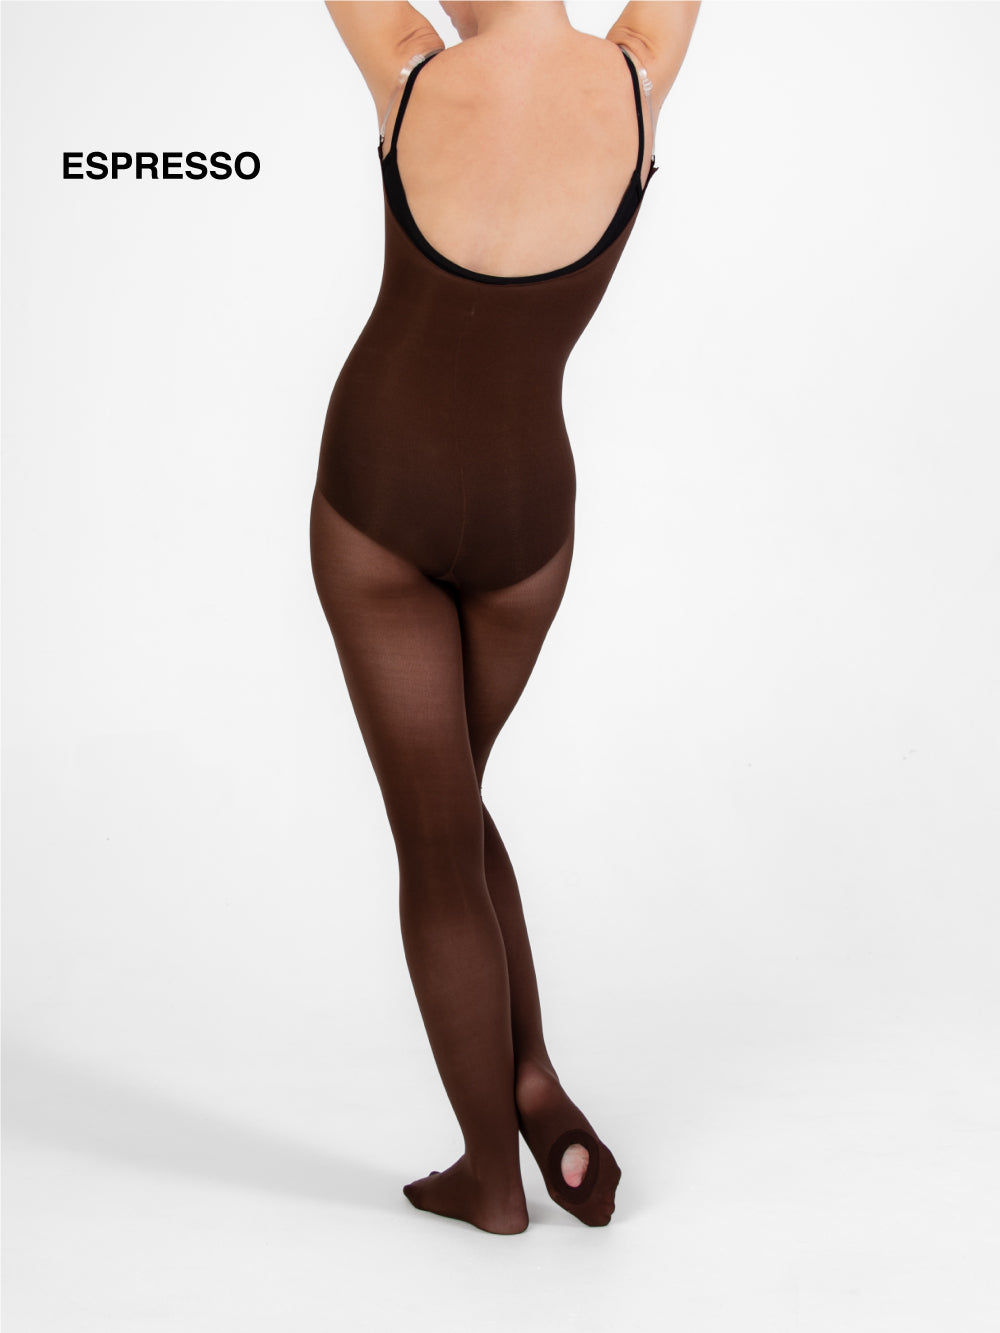 Body Wrappers Total STRETCH Footless Tights (A33X) - Stage Center